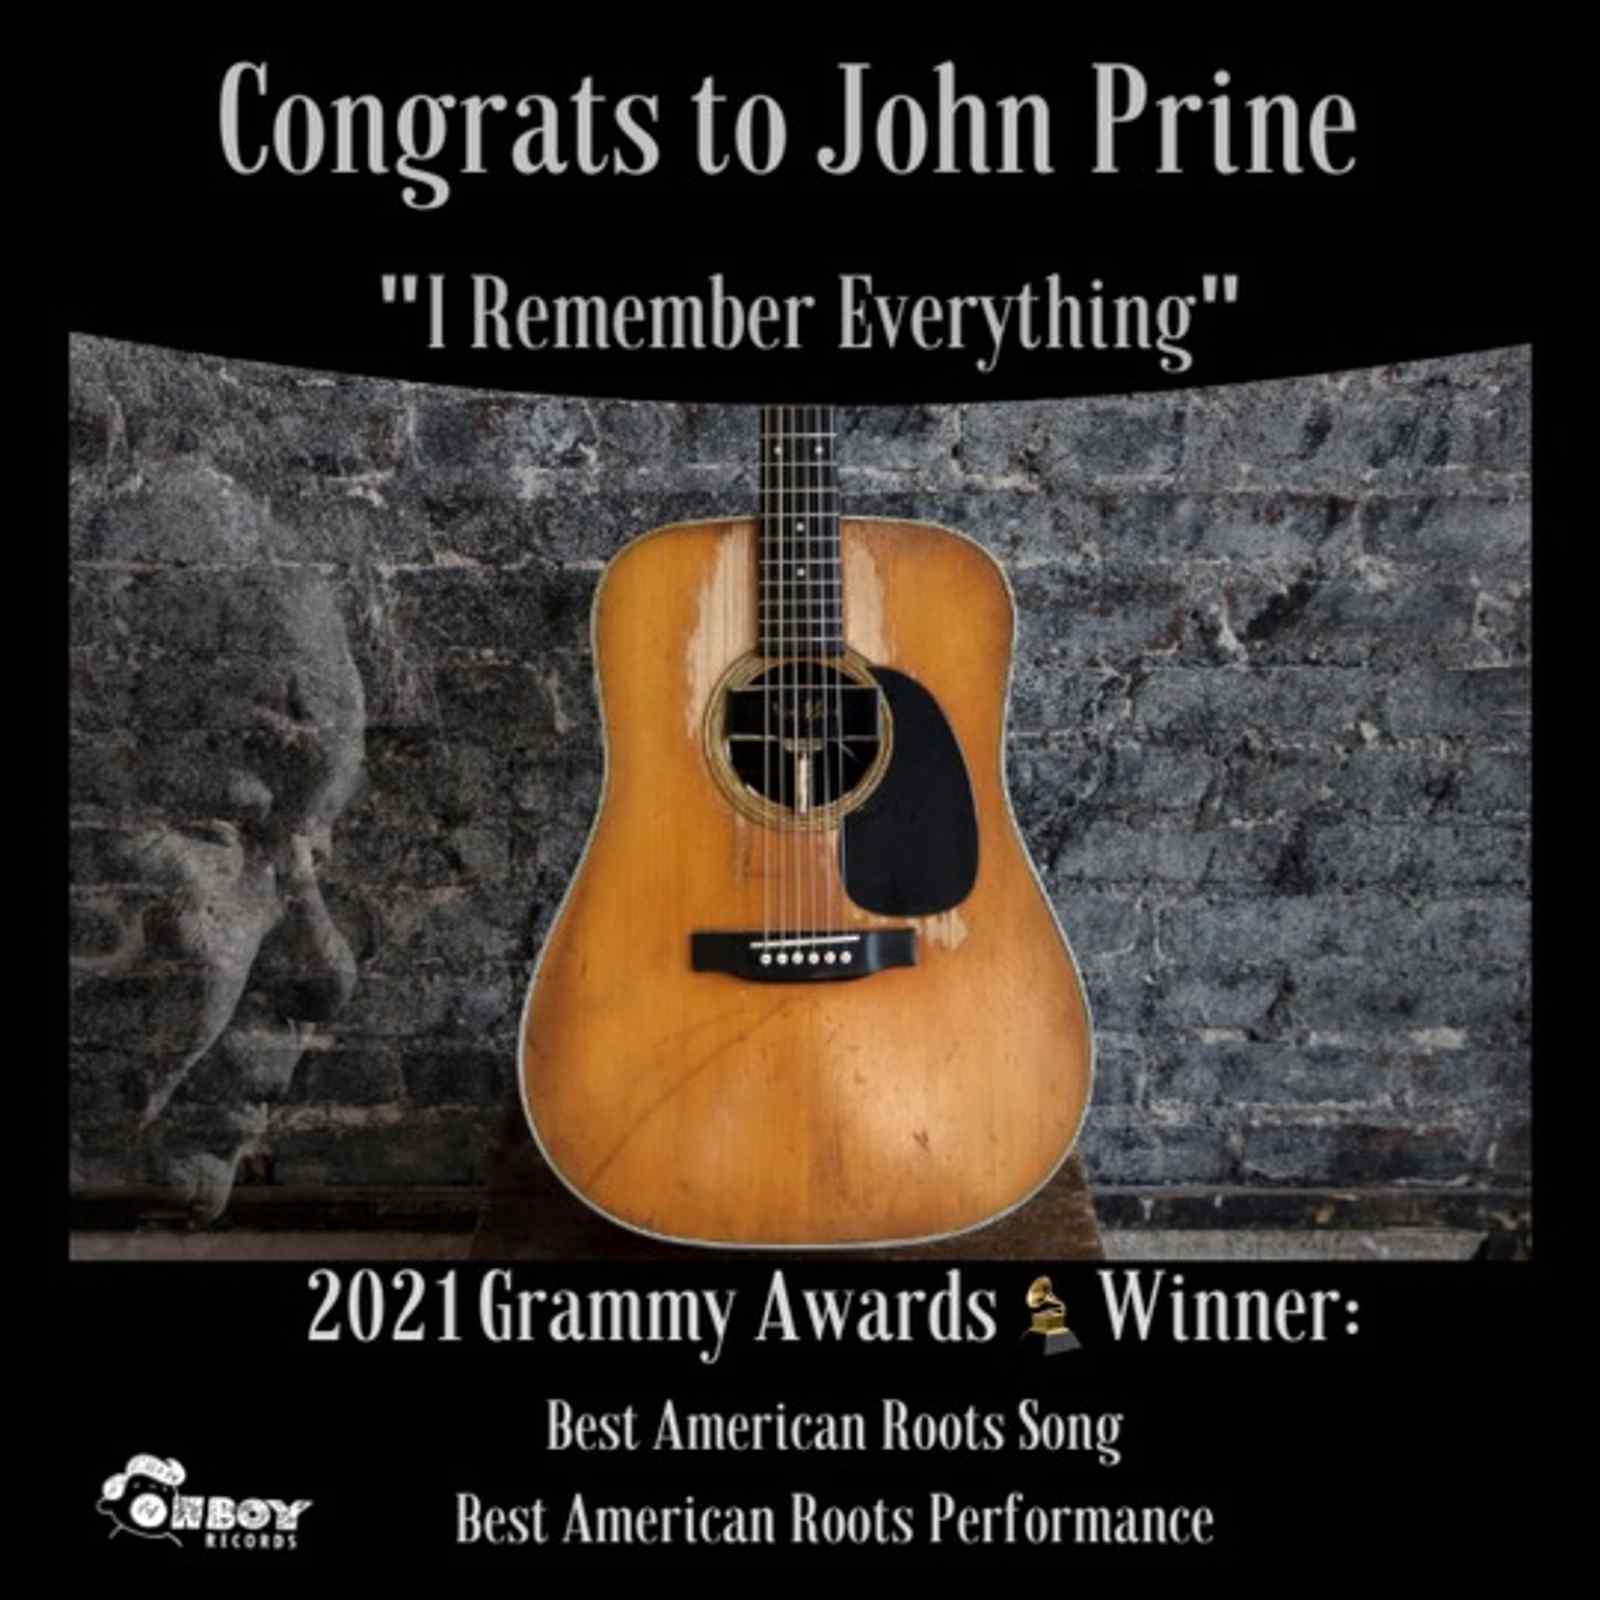 John Prine Wins Best American Roots Song and Performance at 2021 Grammys